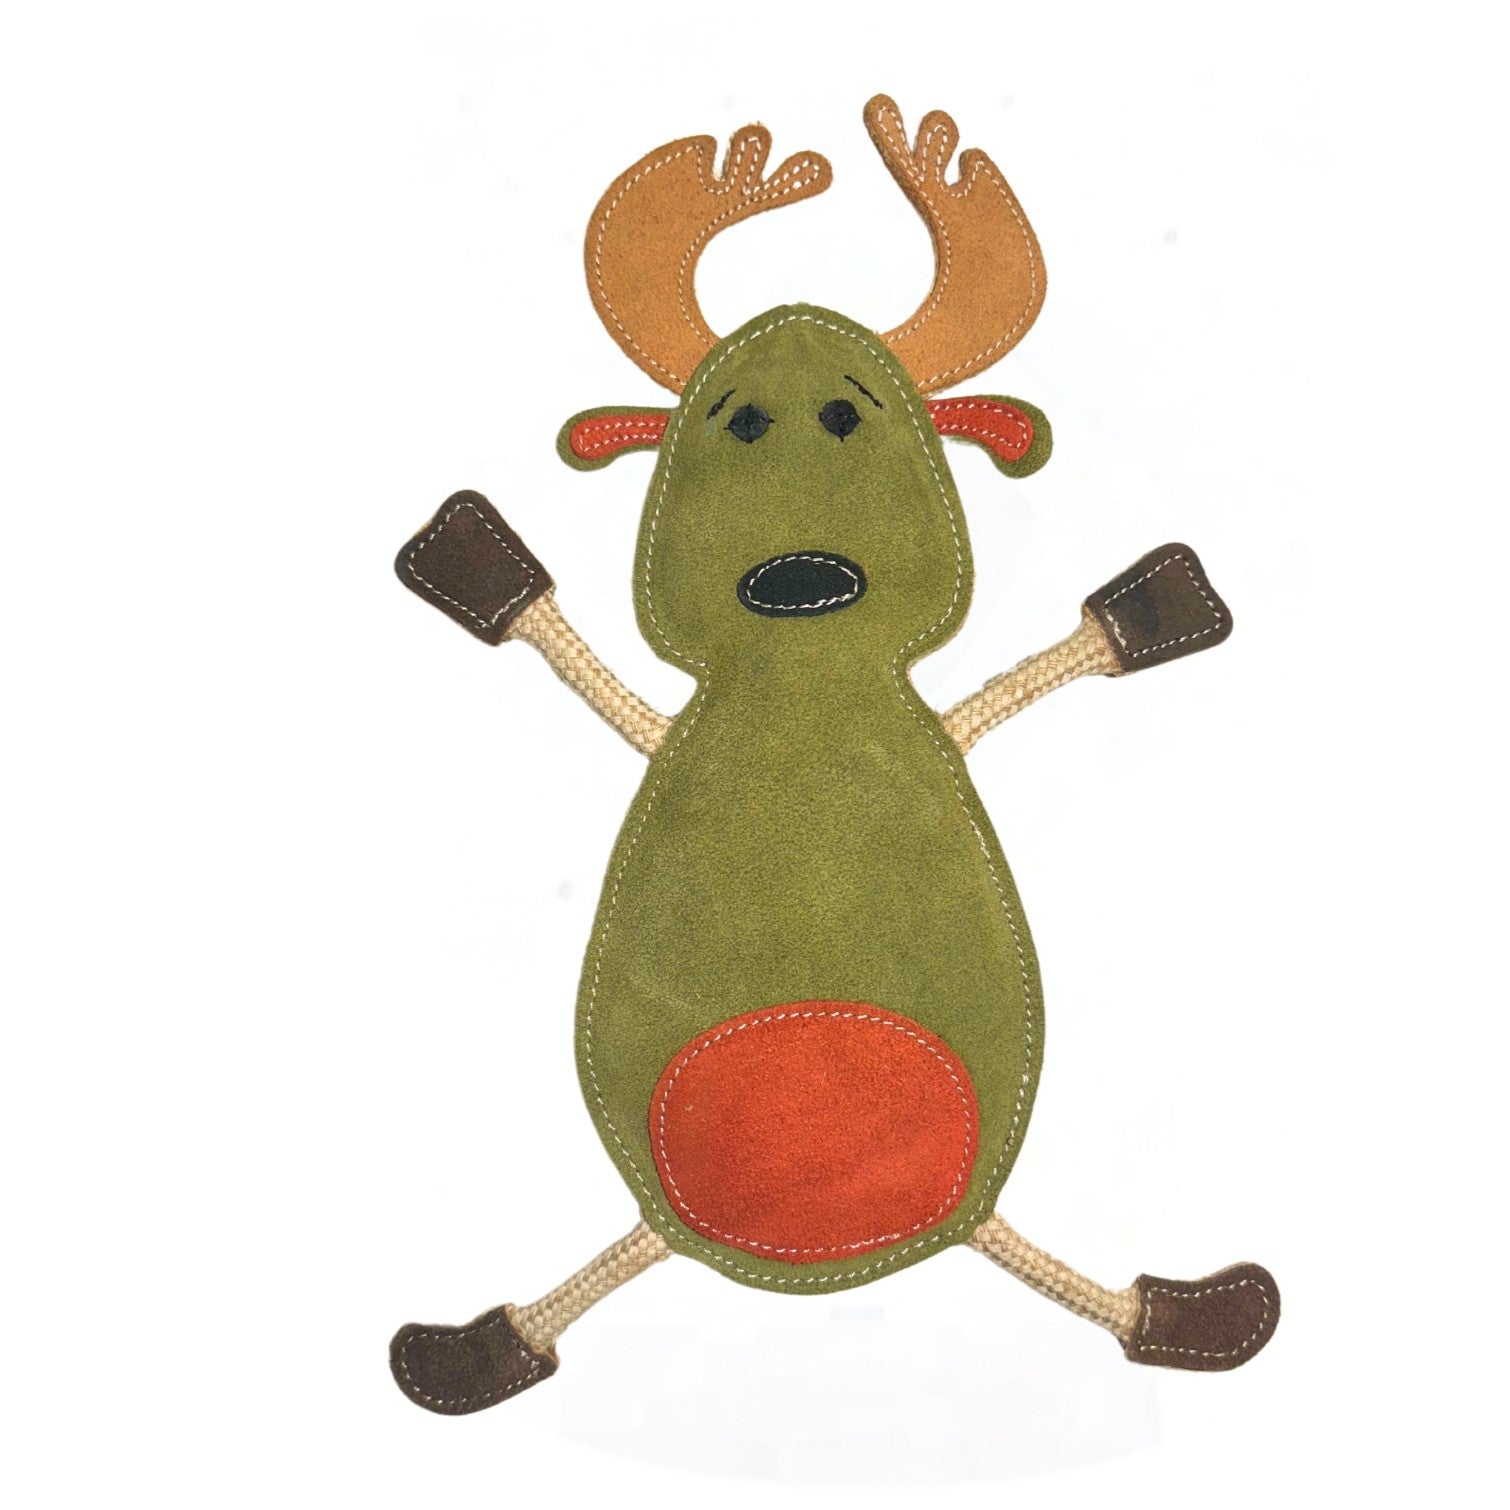 A colorful cartoon-style fabric Ed the red belly Moose toy from Georgie Paws with a green body, large brown antlers, black eyes and mouth, an orange belly patch, and limbs with brown hooves, all arranged symmetrically.